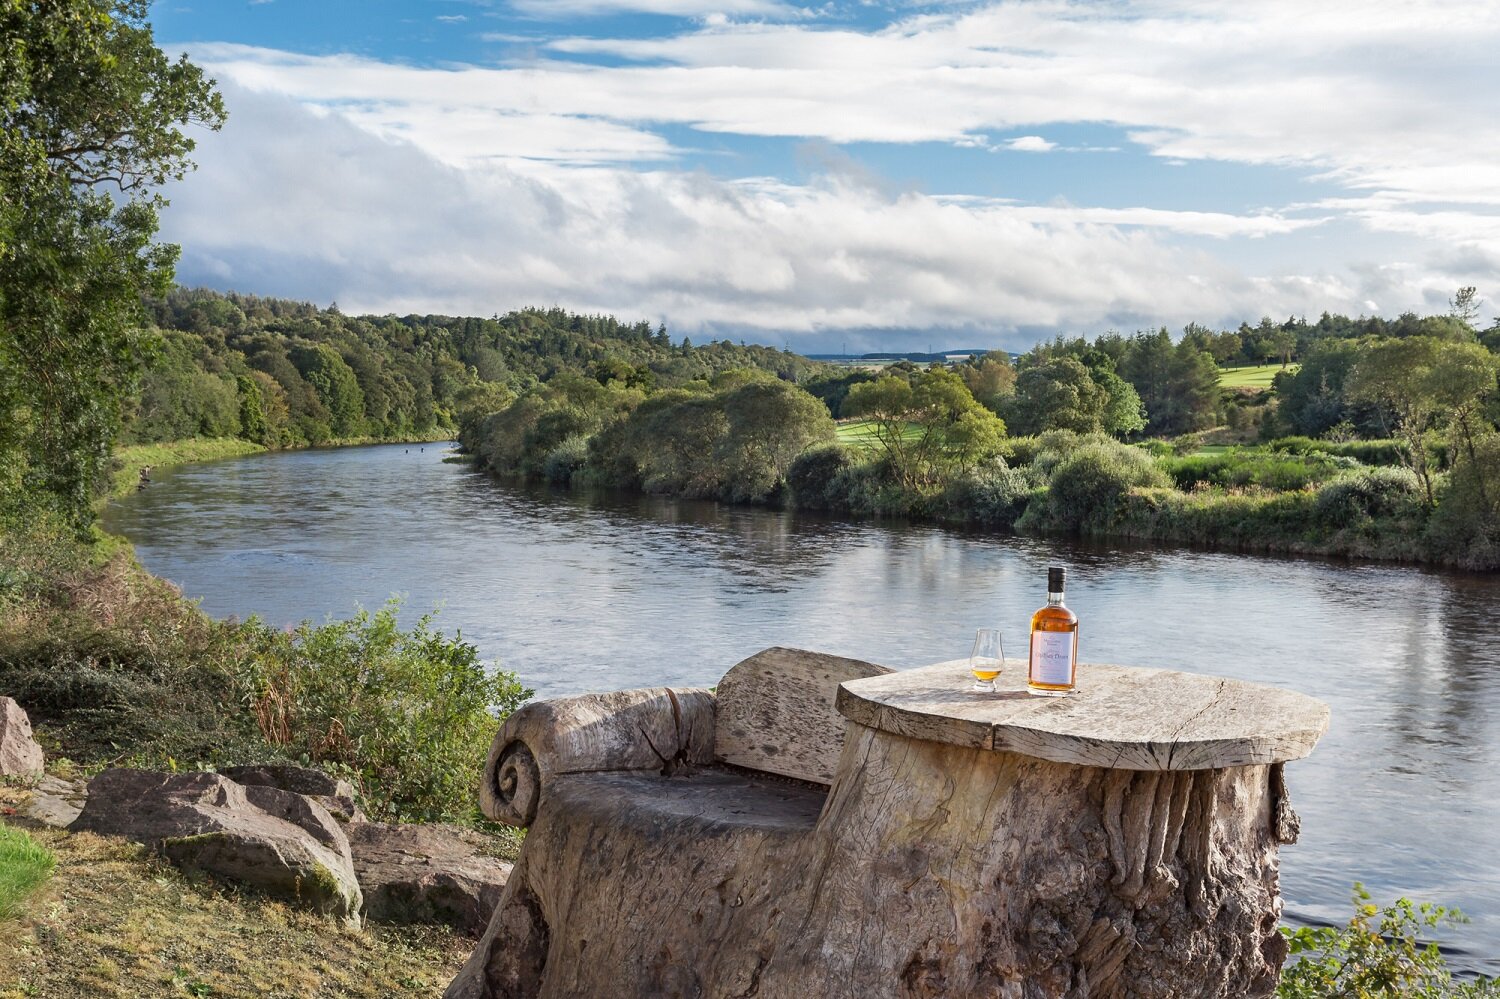 14_S_River view Tree seat Ghillies Dram Glencairn glass_Maryculter House_Aug 2019.jpg